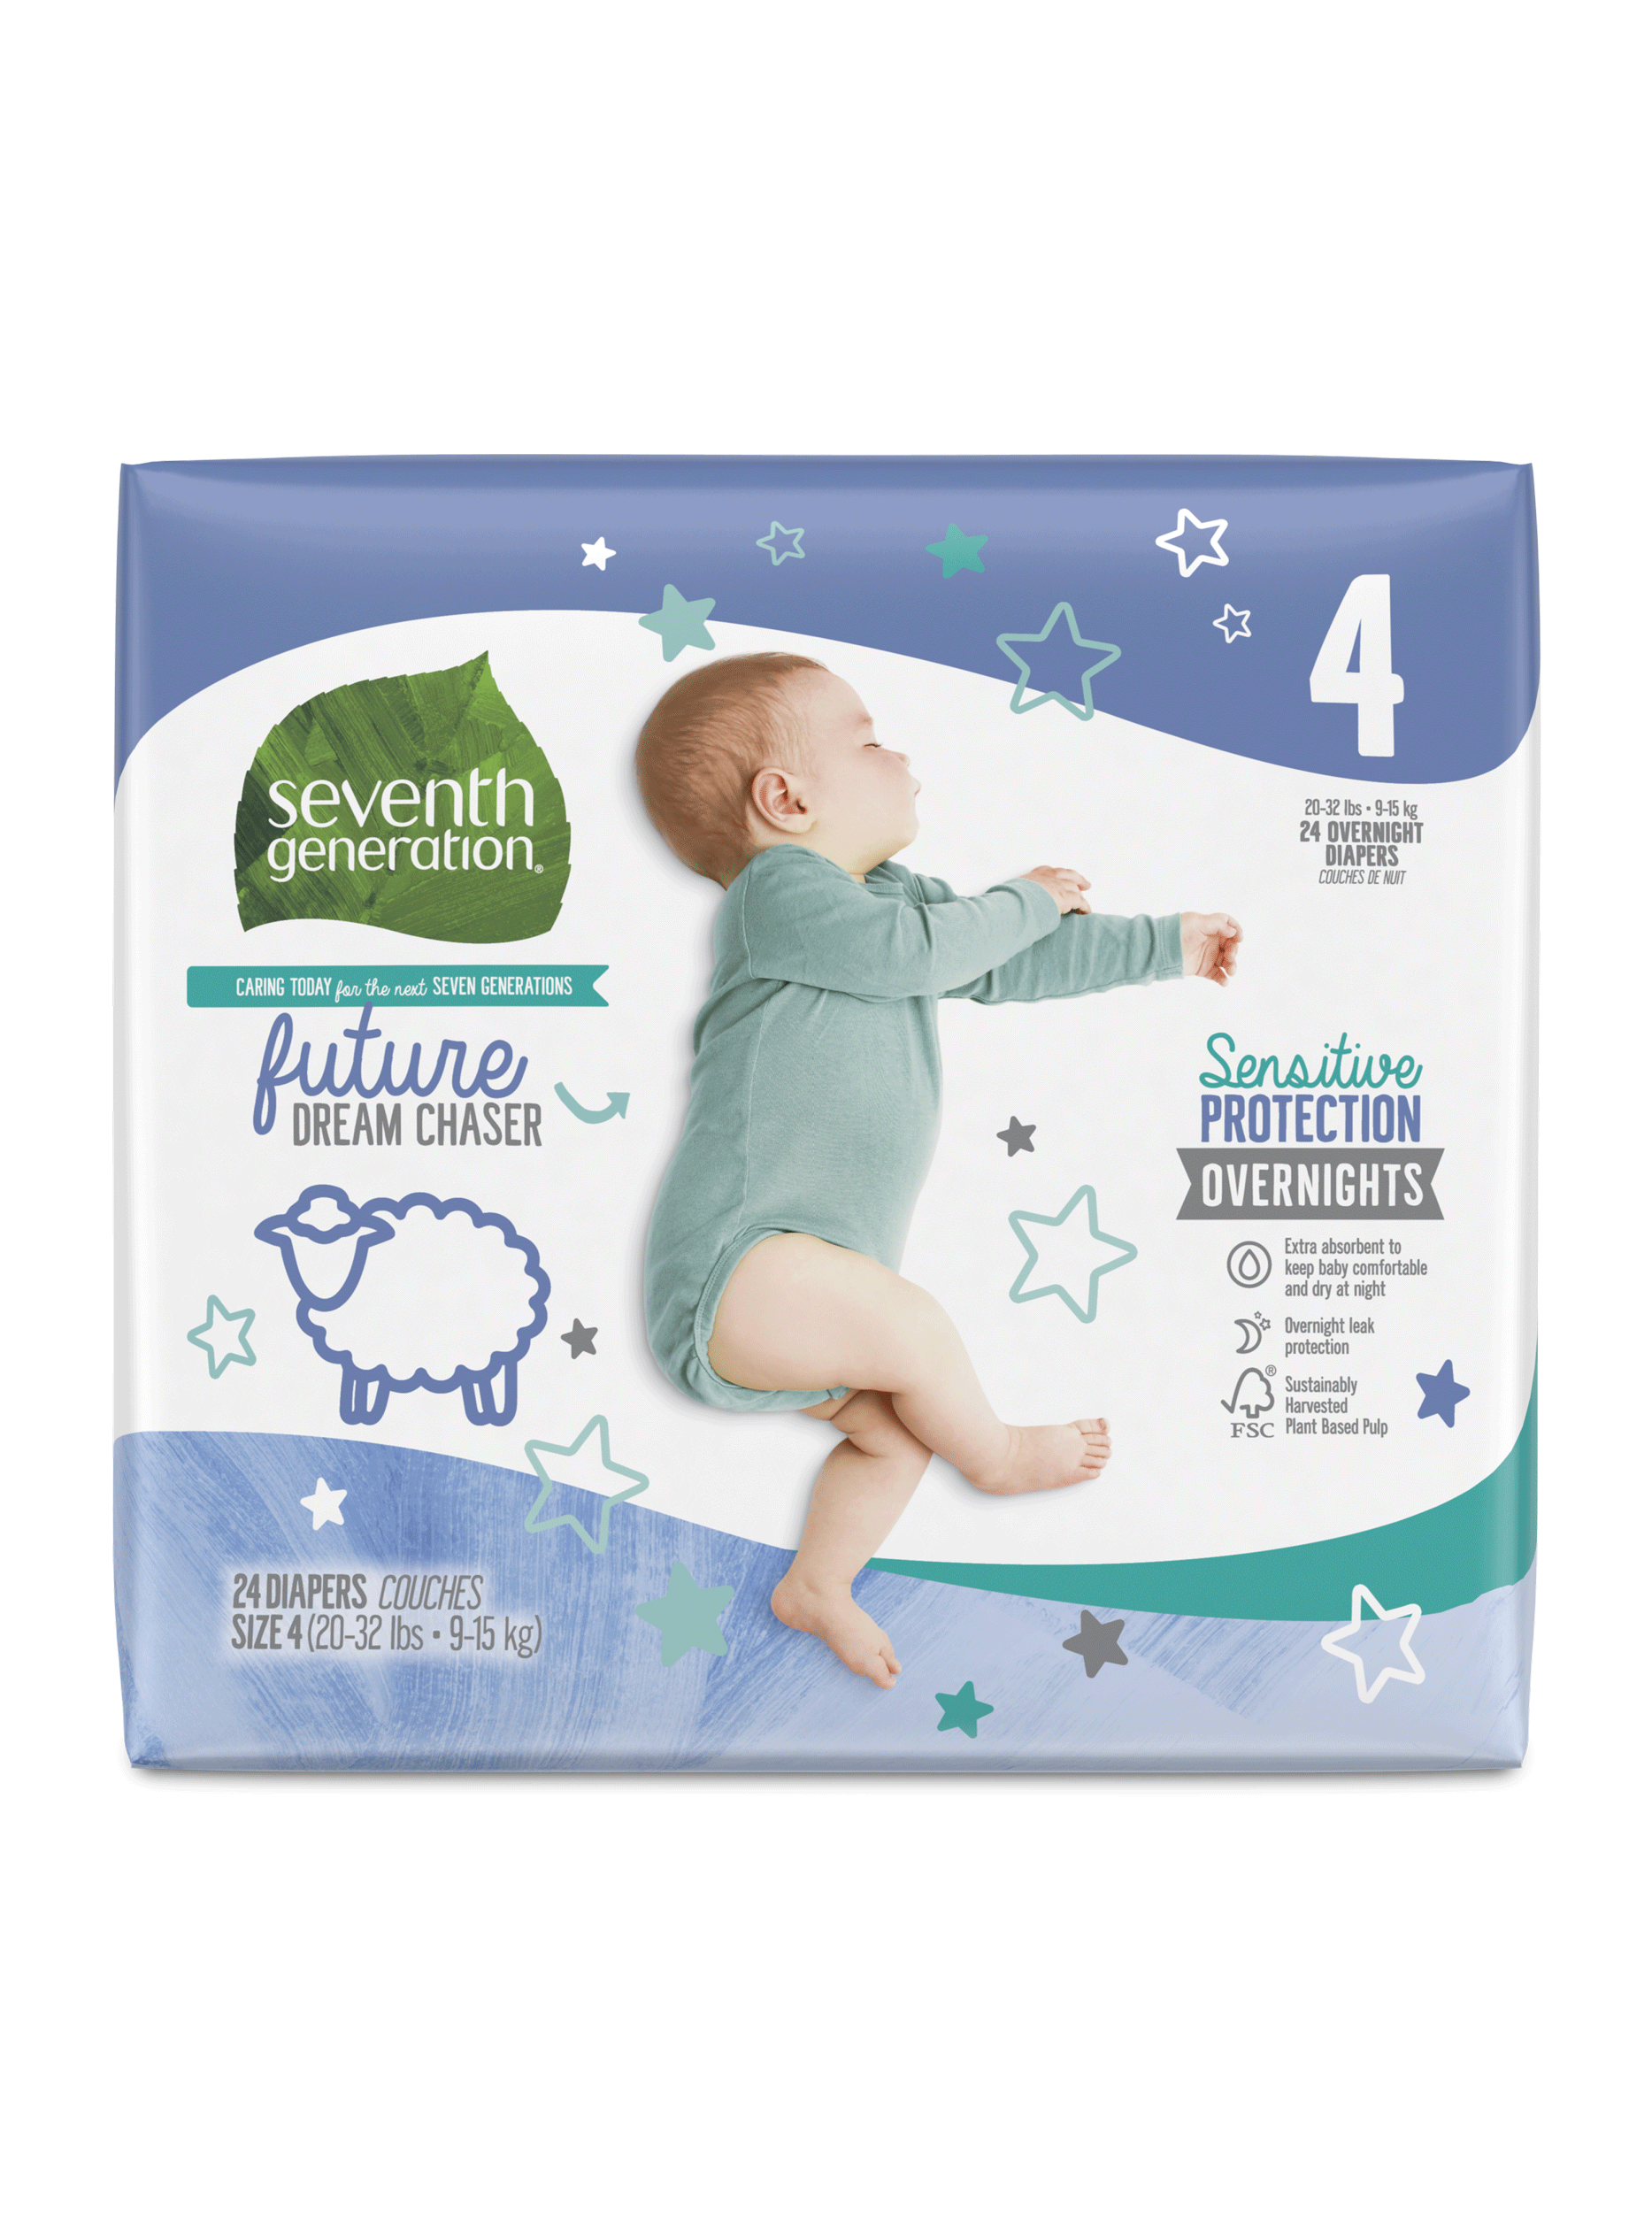 Pin on Overnight diapers